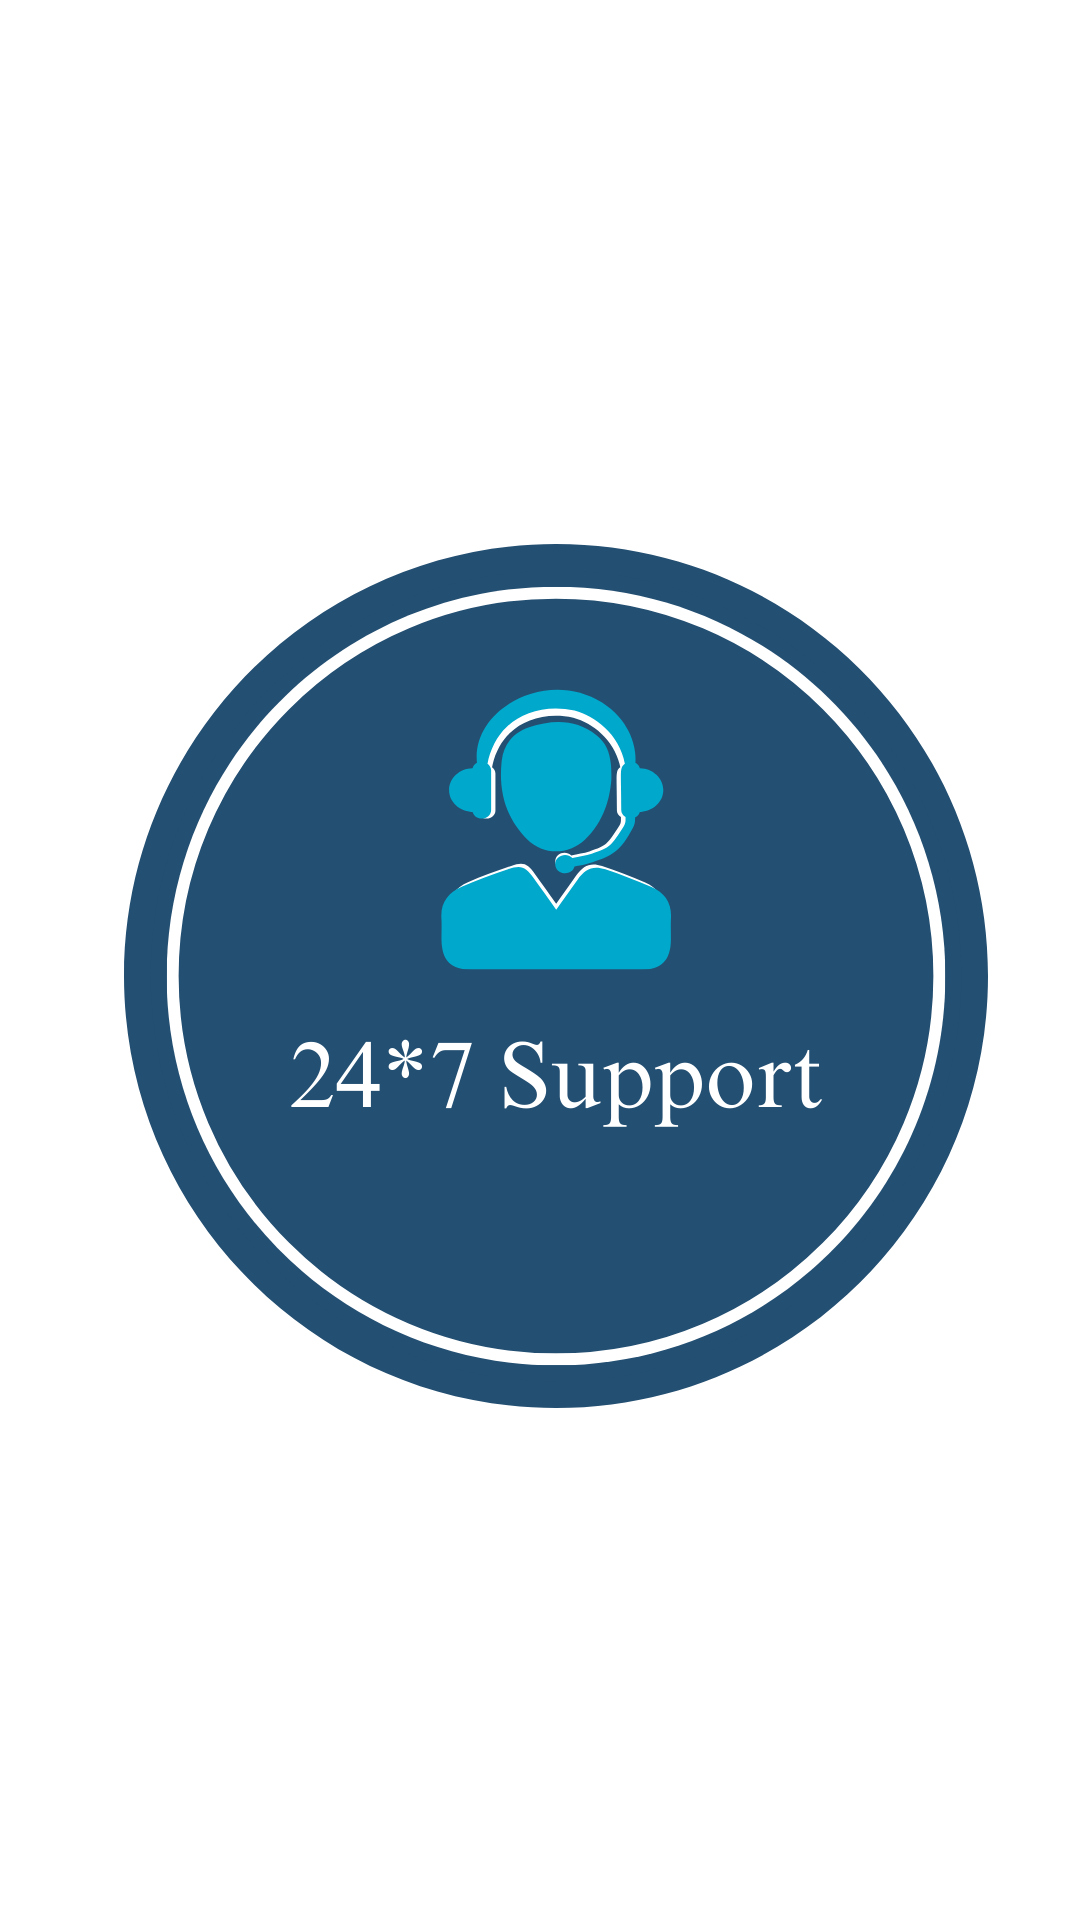 24*7 Support